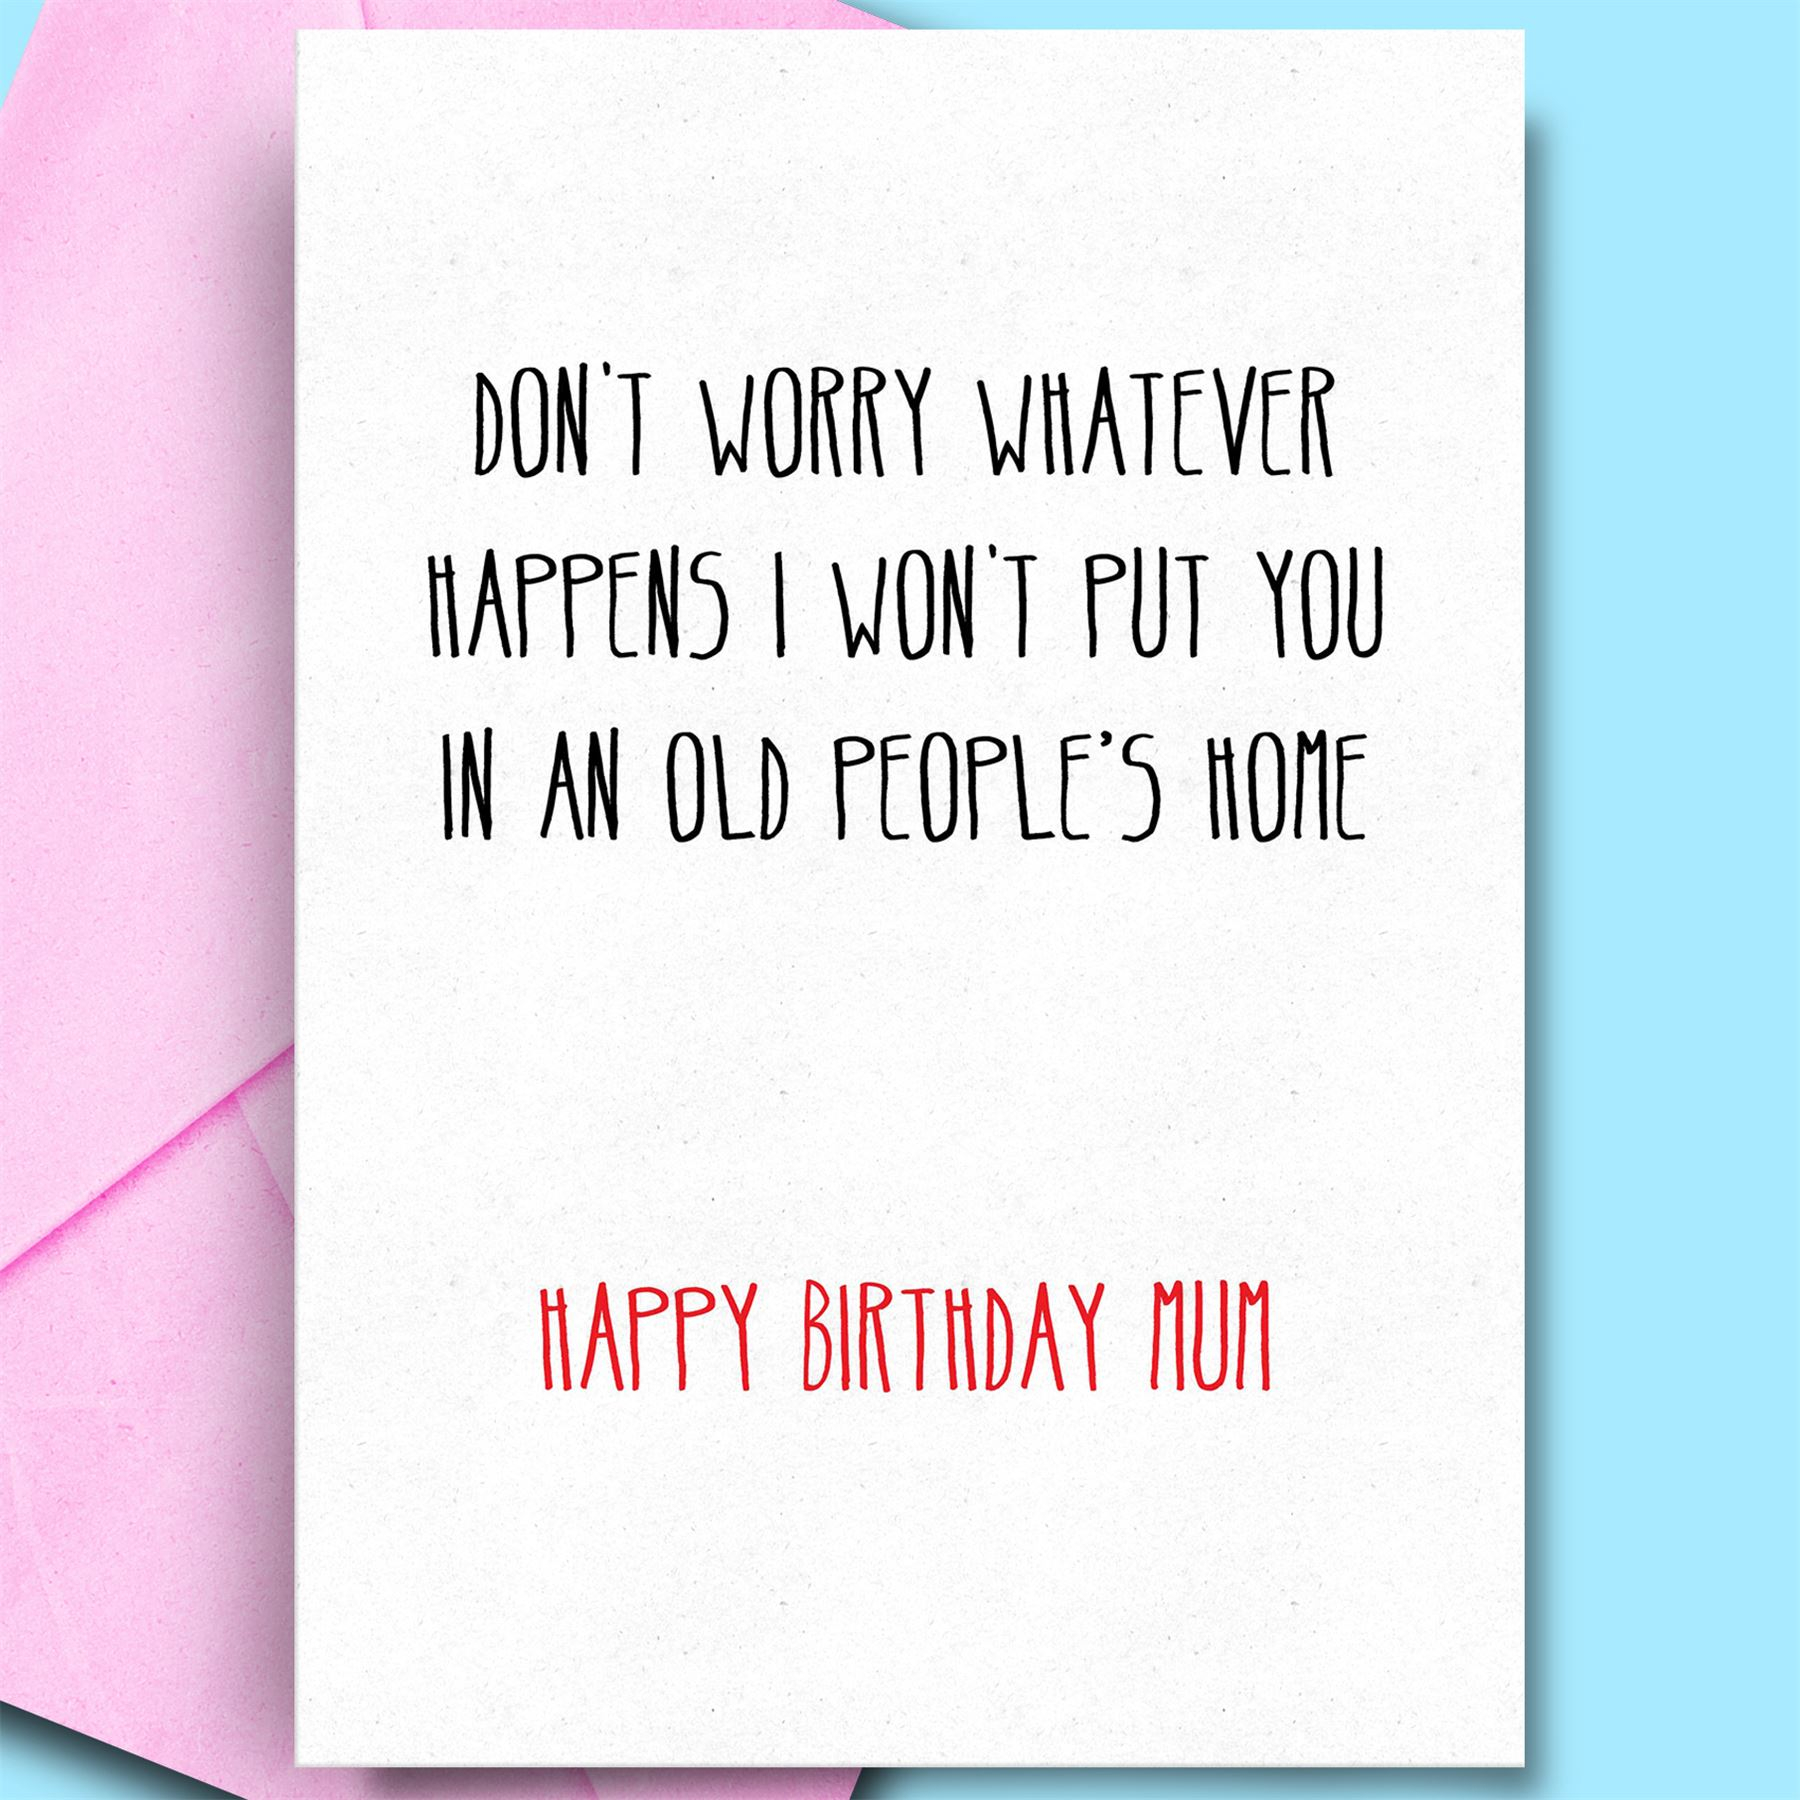 Ideas For Birthday Cards For Dads Happy Birthday Cards Dad Mummy Mum Cool Birthday Cards Best Birthday